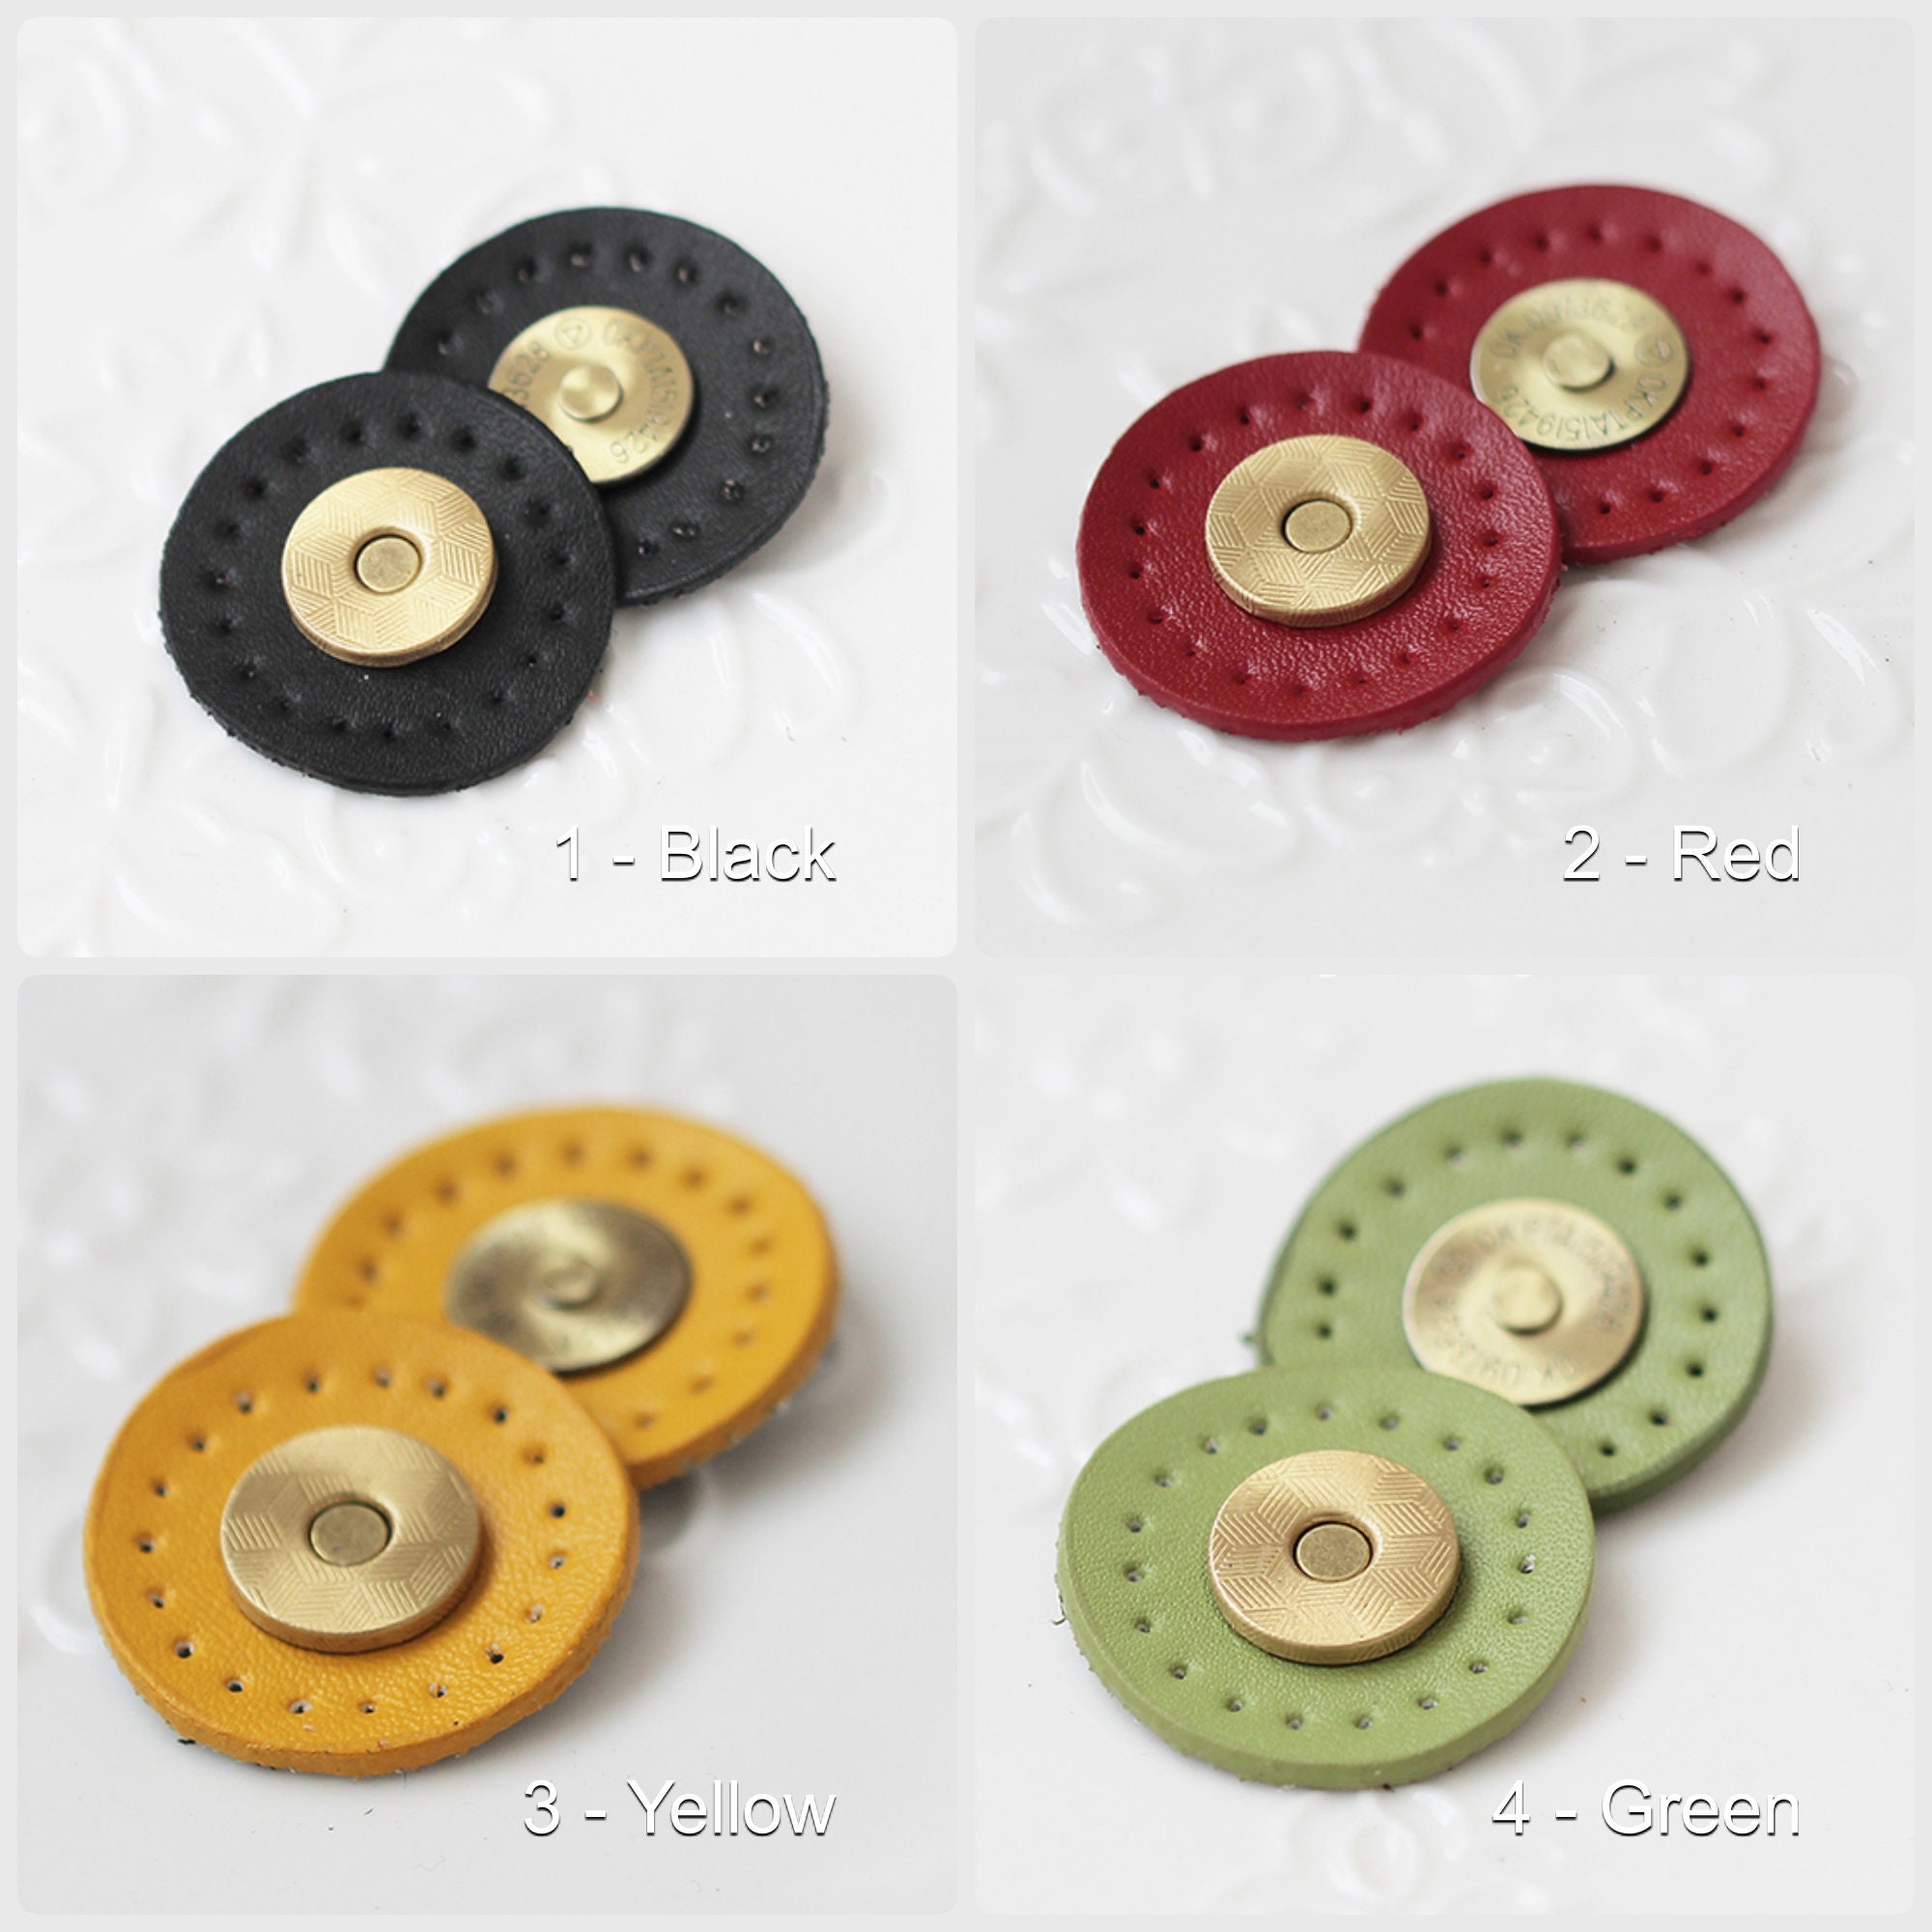 Buttons Magnetic Sew on 3/4in 2ct